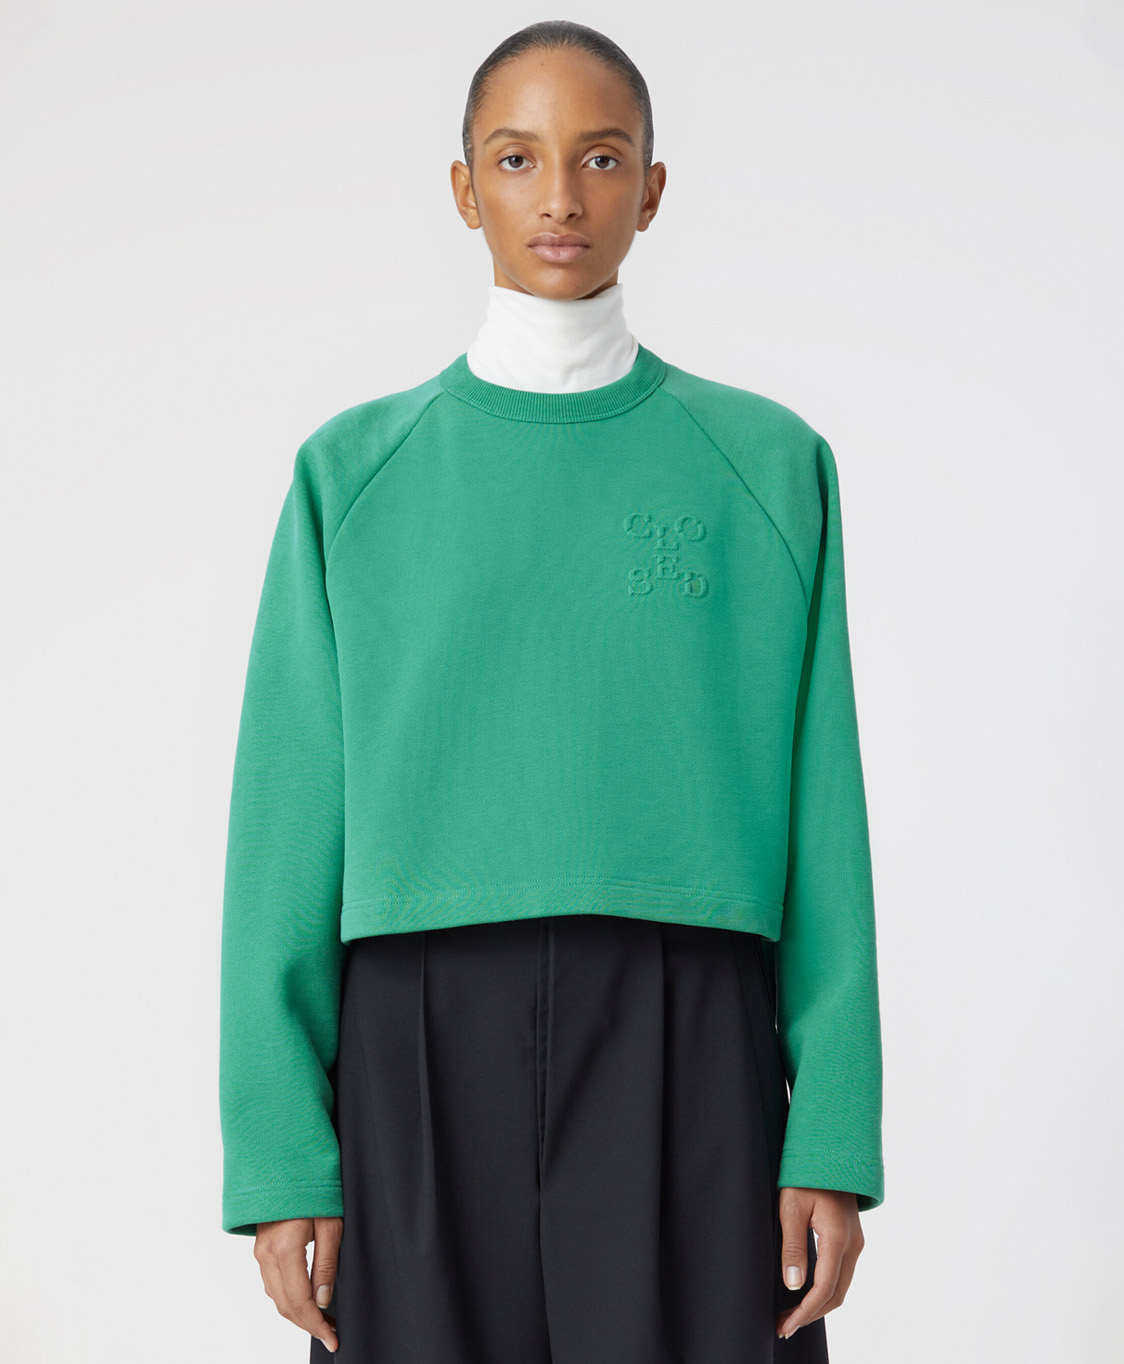 Closed Pullover Crew Neck Long Sleeve Groen